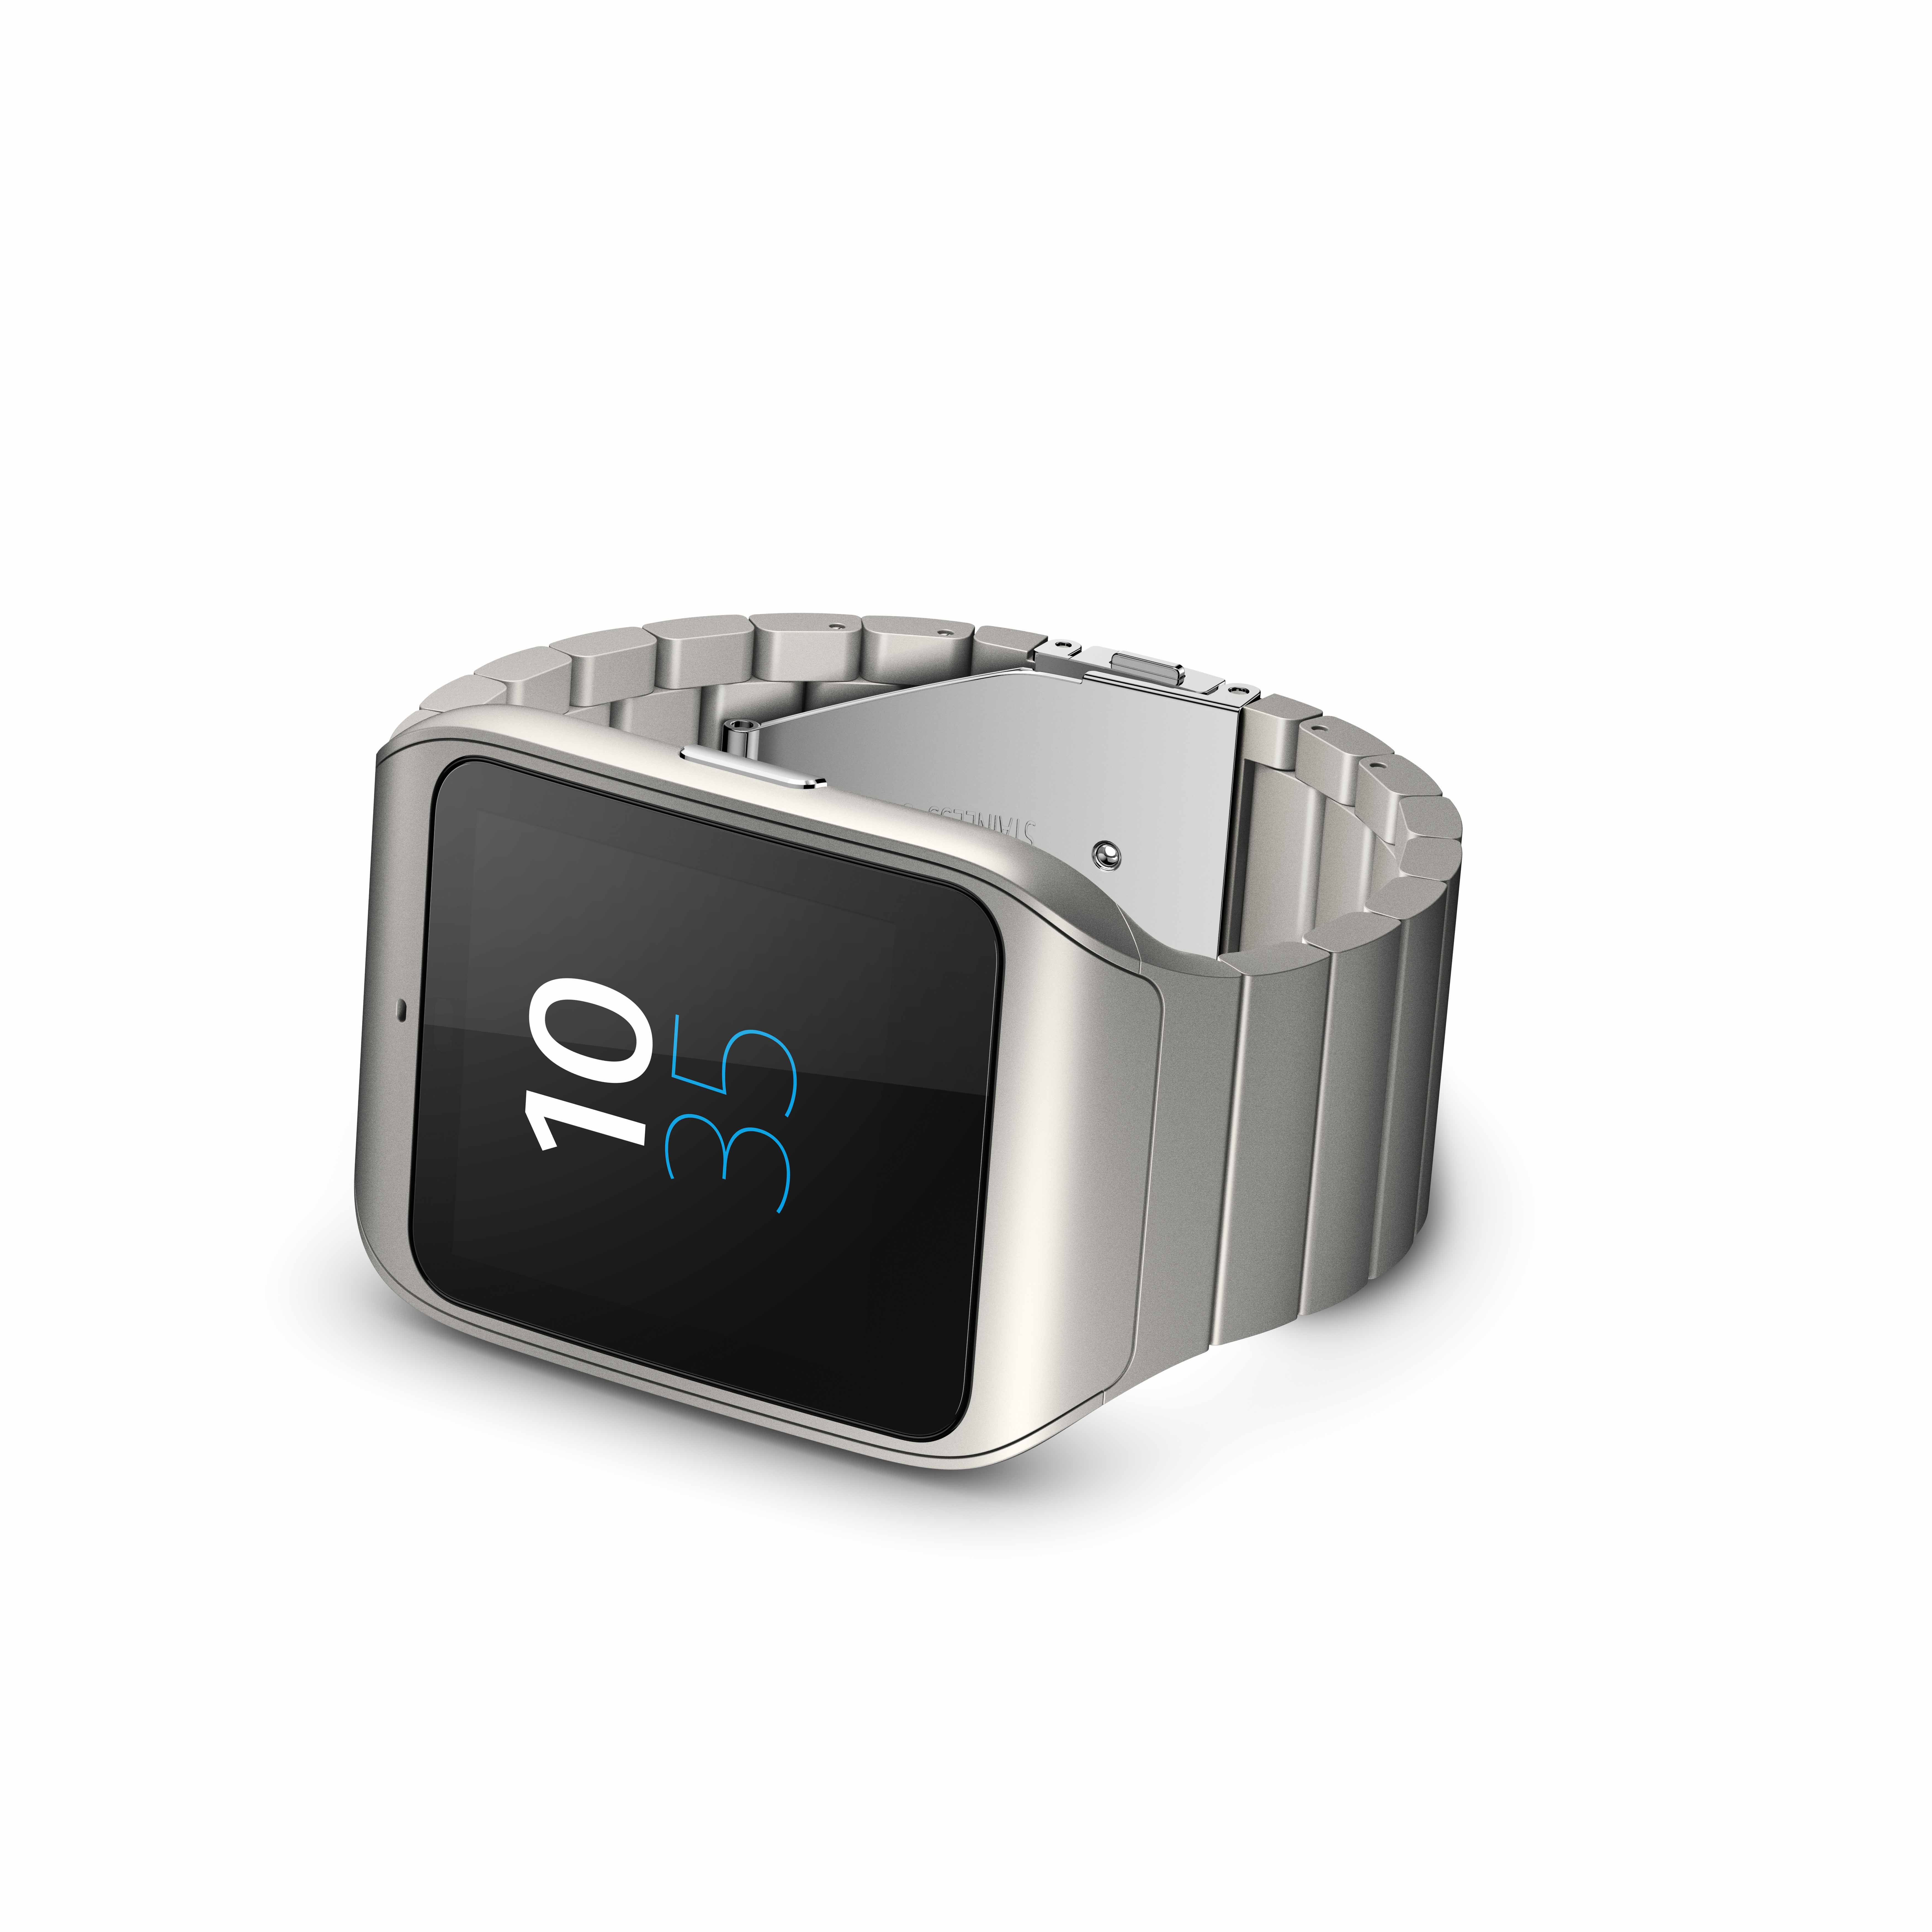 02_SmartWatch3_Acero inoxidable lateral